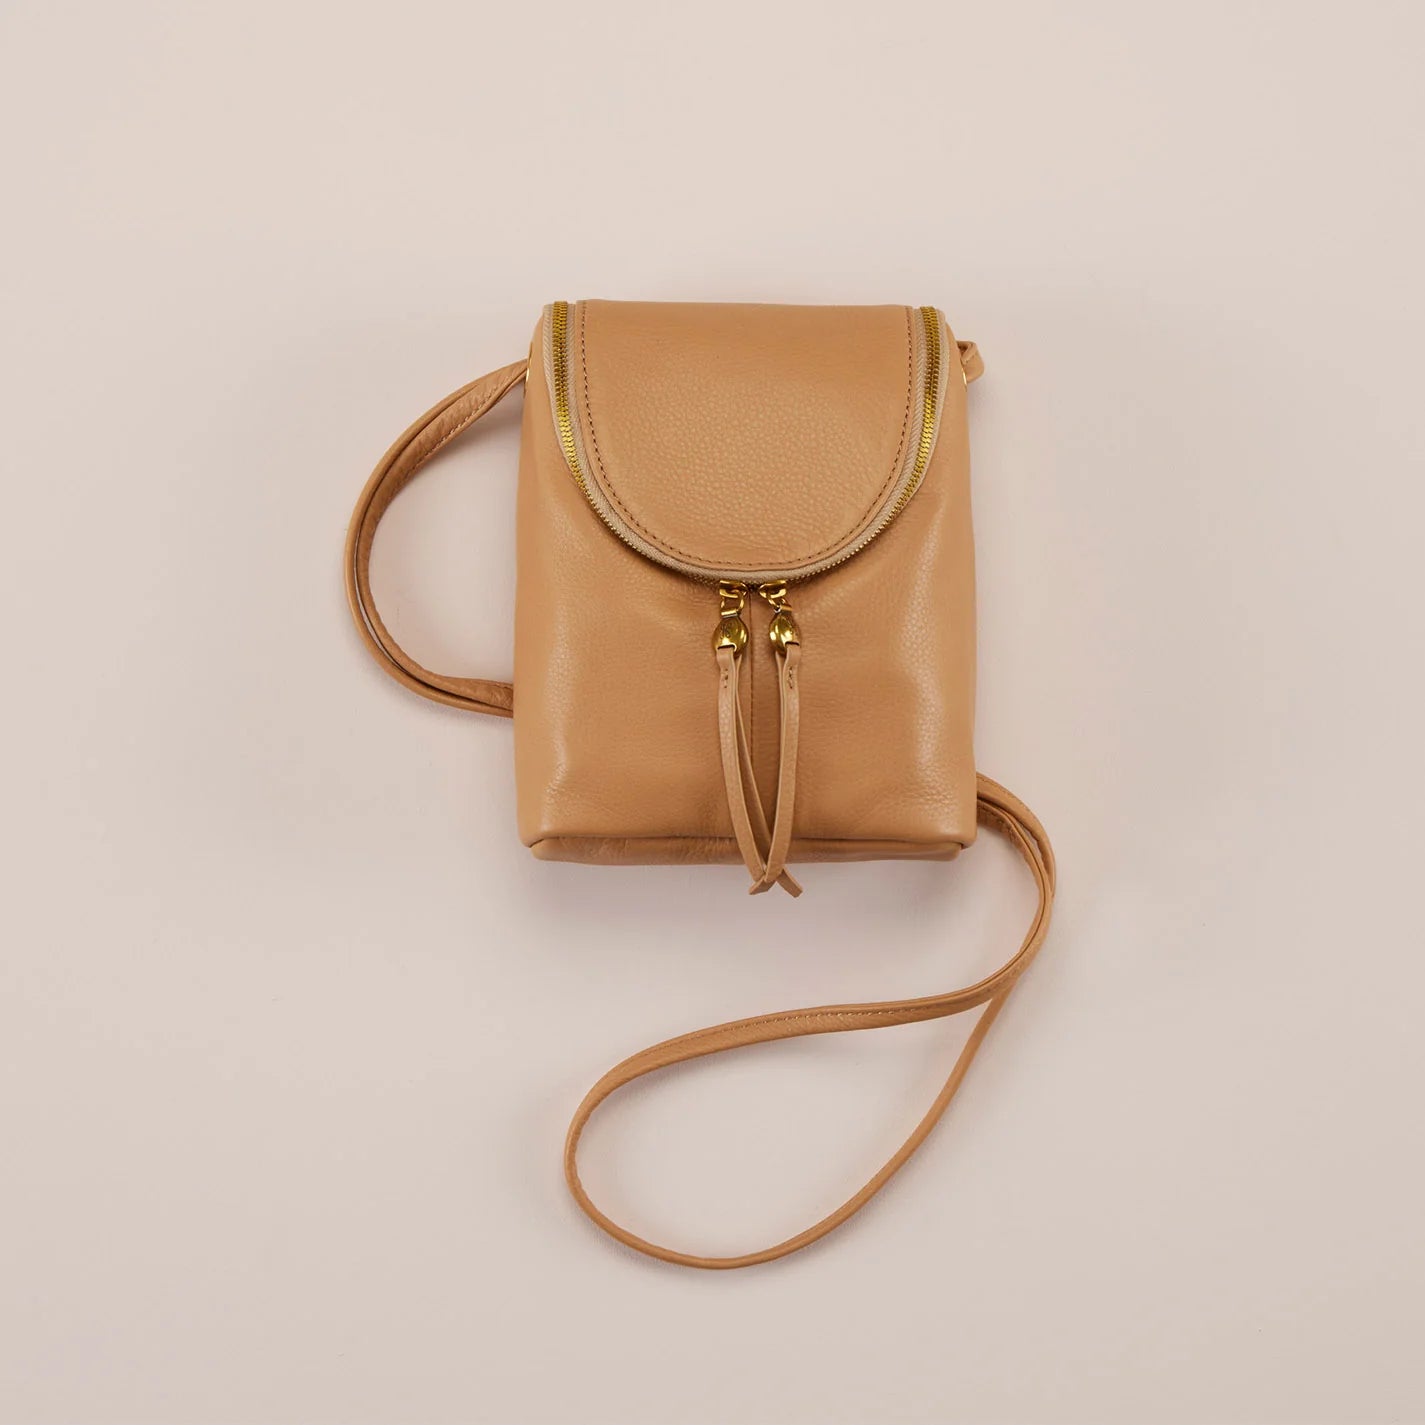 The Fern Crossbody in sandstorm has a double-zipper closure for easy access, an endlessly adjustable strap, and an exterior slip pocket for your phone. Check it out at the Painted Cottage in Edgewater, MD